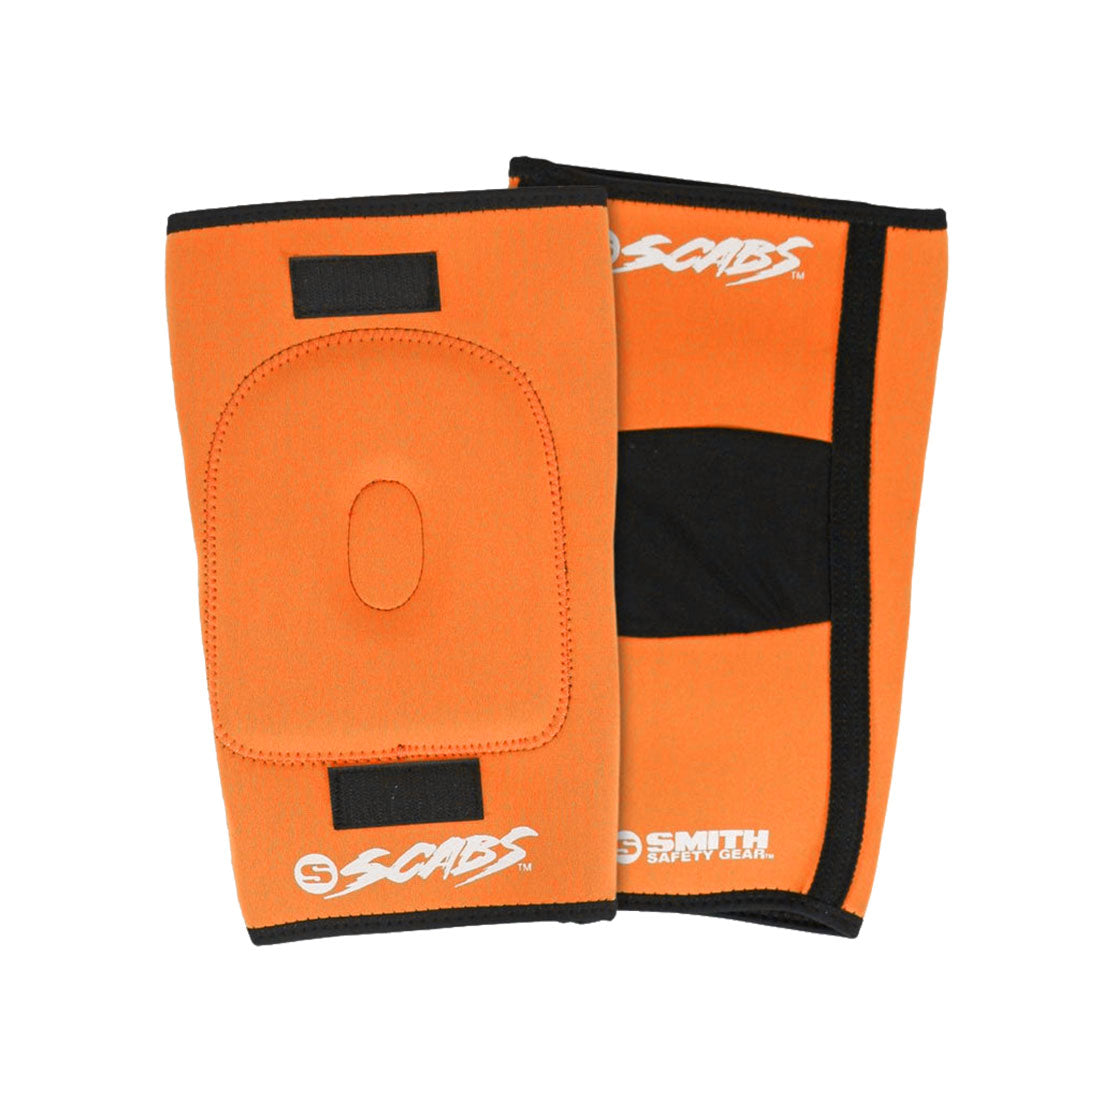 Smith Scabs Knee Gasket - Coloured Orange Protective Gear